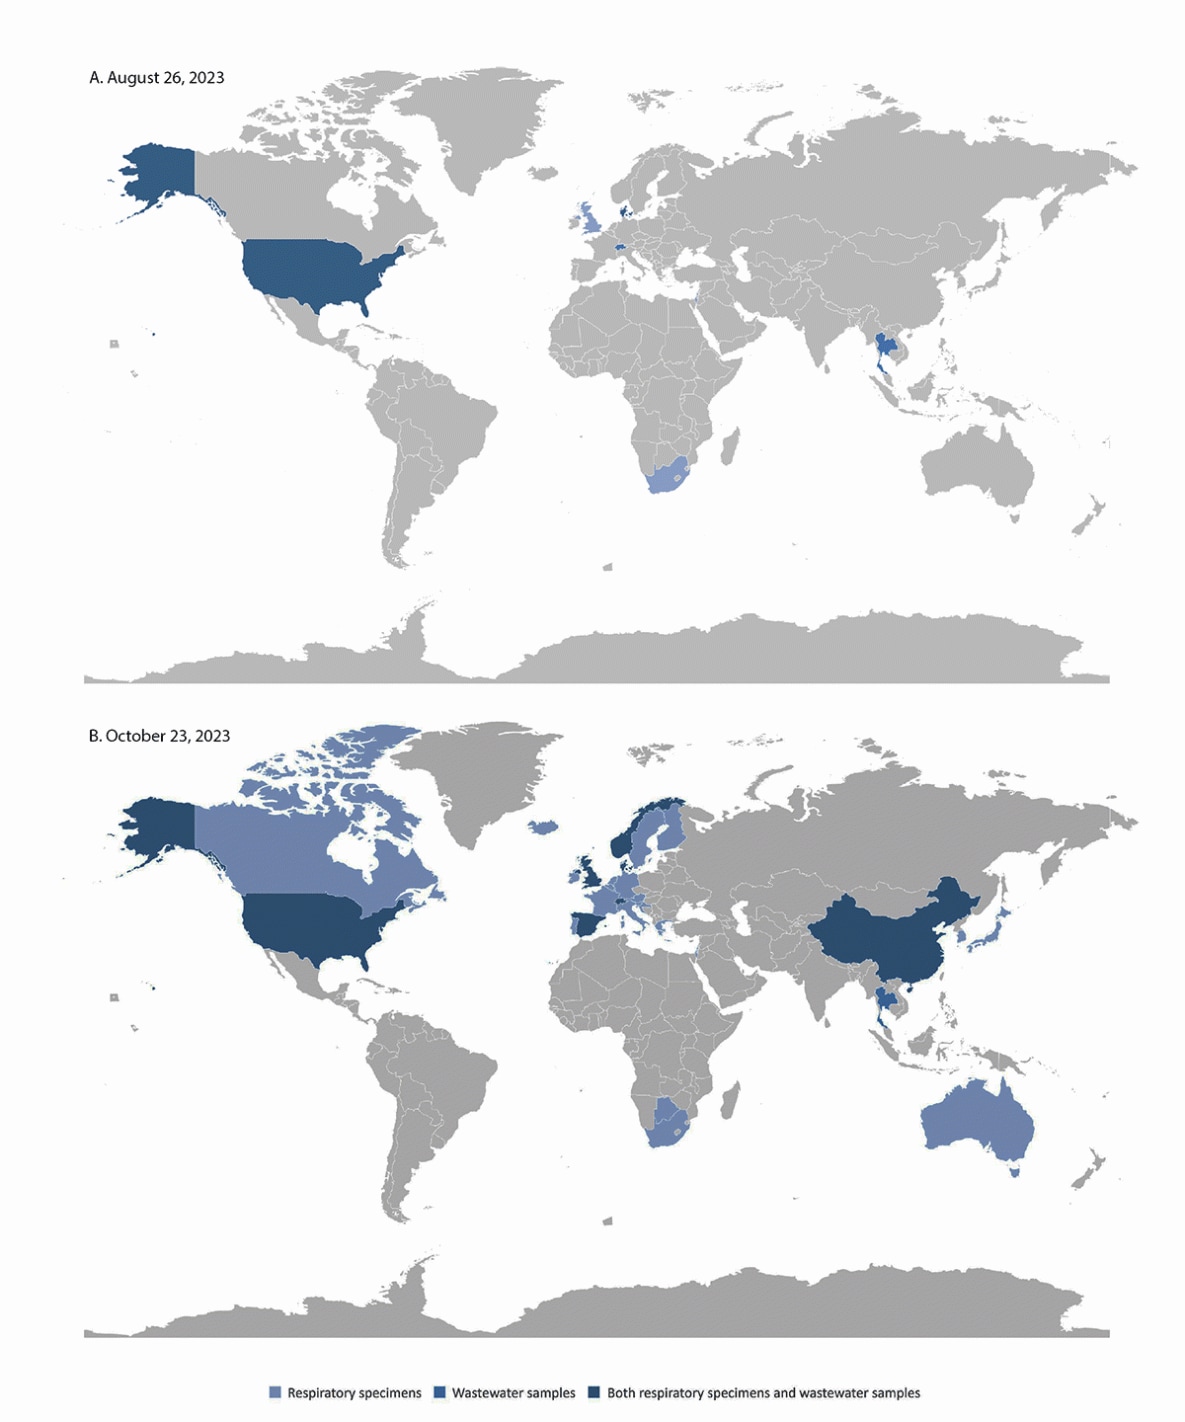 The figure is a map illustrating the geographic spread of SARS-CoV-2 BA.2.86 variant detection in respiratory and wastewater samples, by country, during August 26 and October 5, 2023.